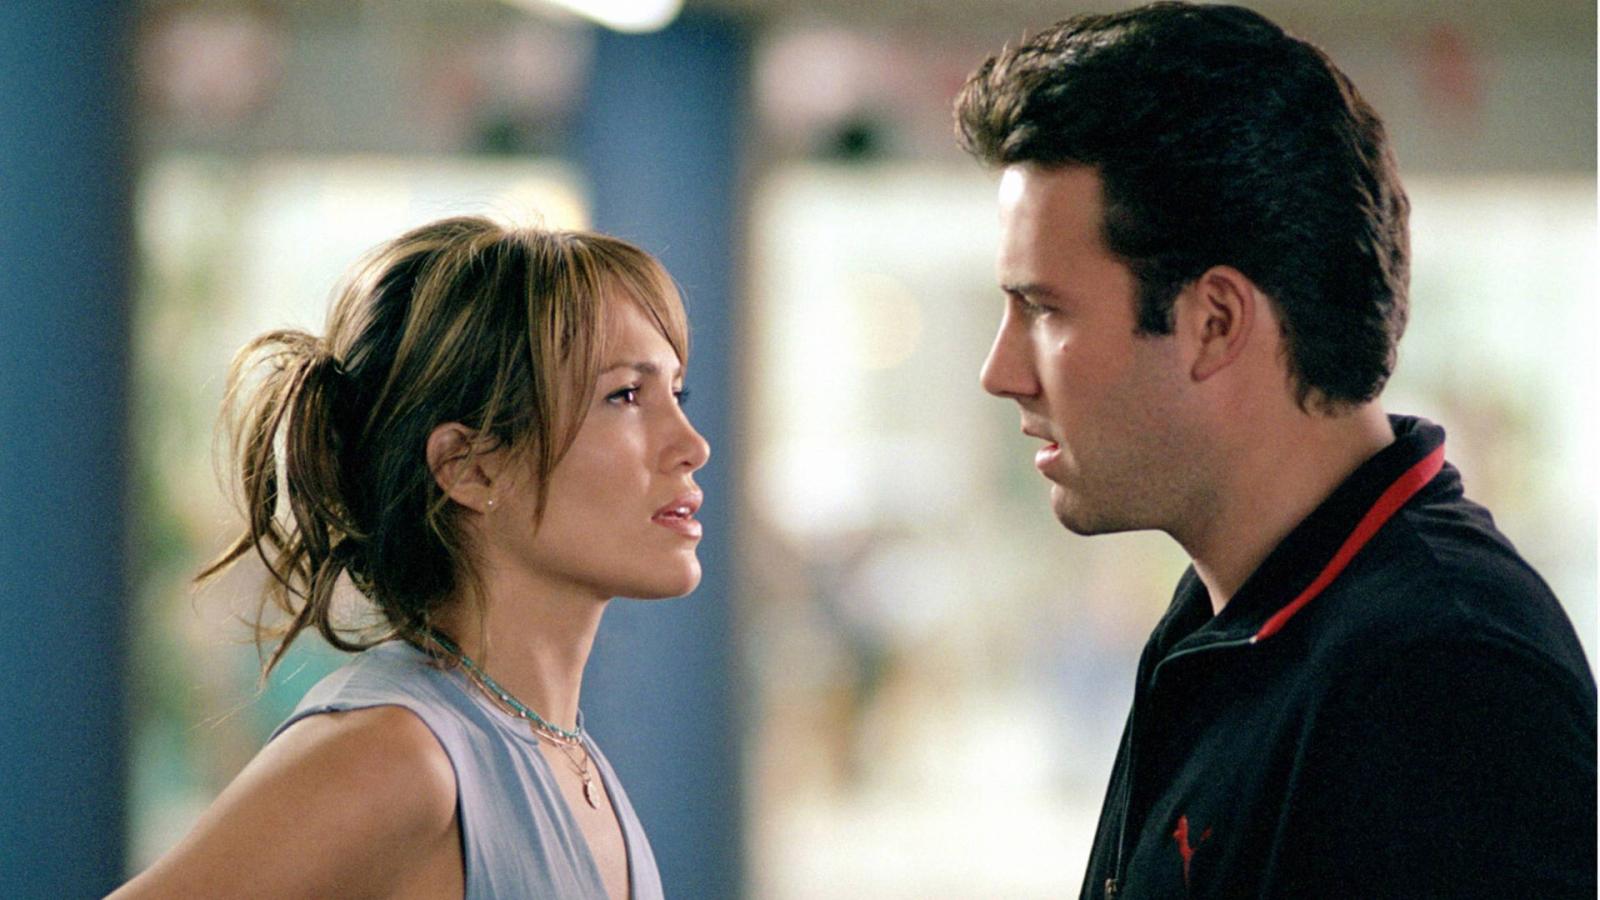 15 Romance Movies from the 2000s So Bad, They're Actually Good - image 6